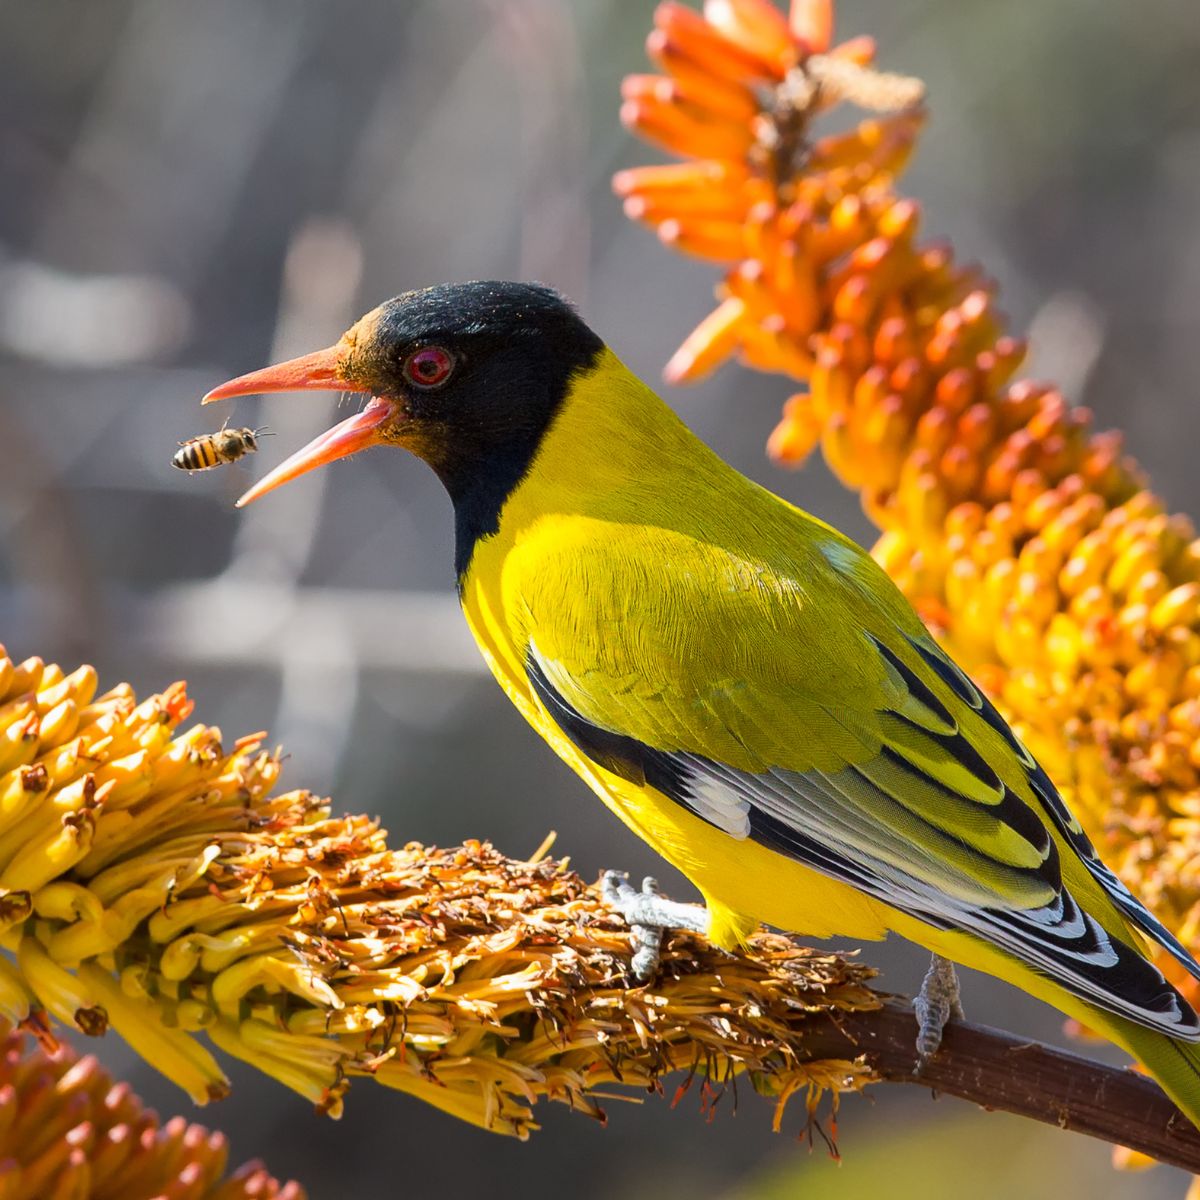 black headed oriole sitting on yellow aloe flowers to catch a bee.